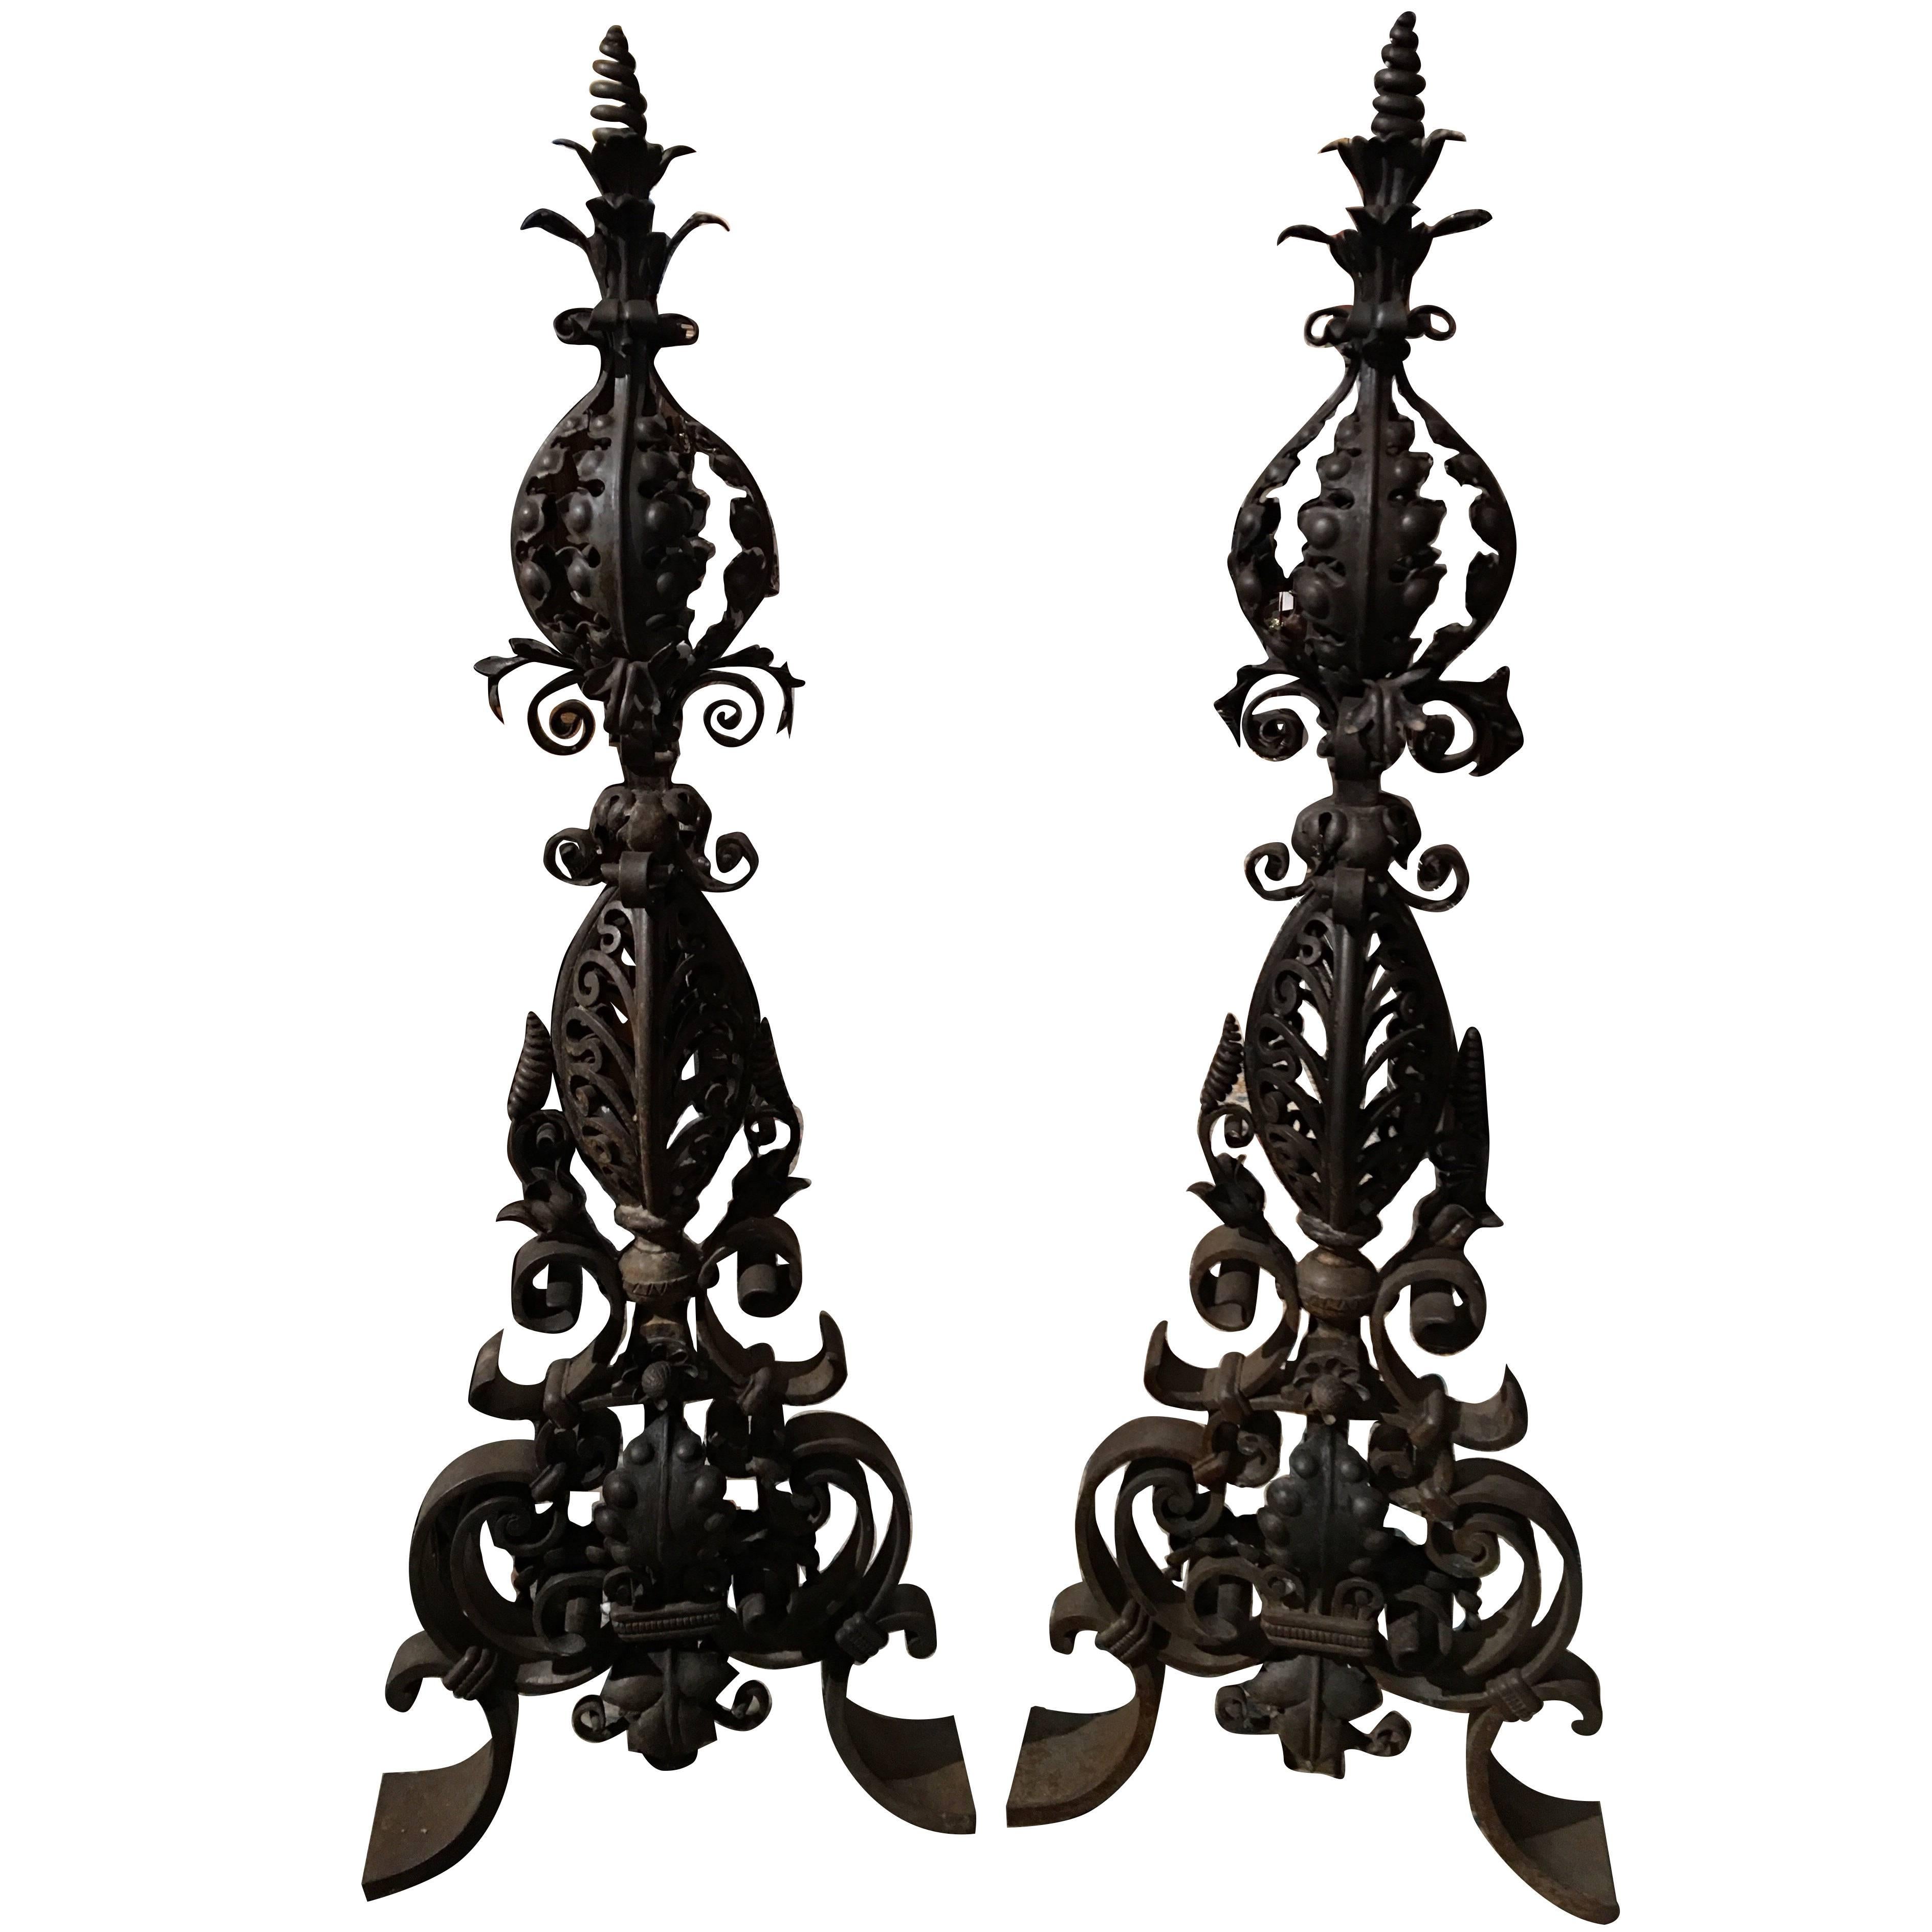 Pair of French Iron Chenets or Andirons, 19th Century